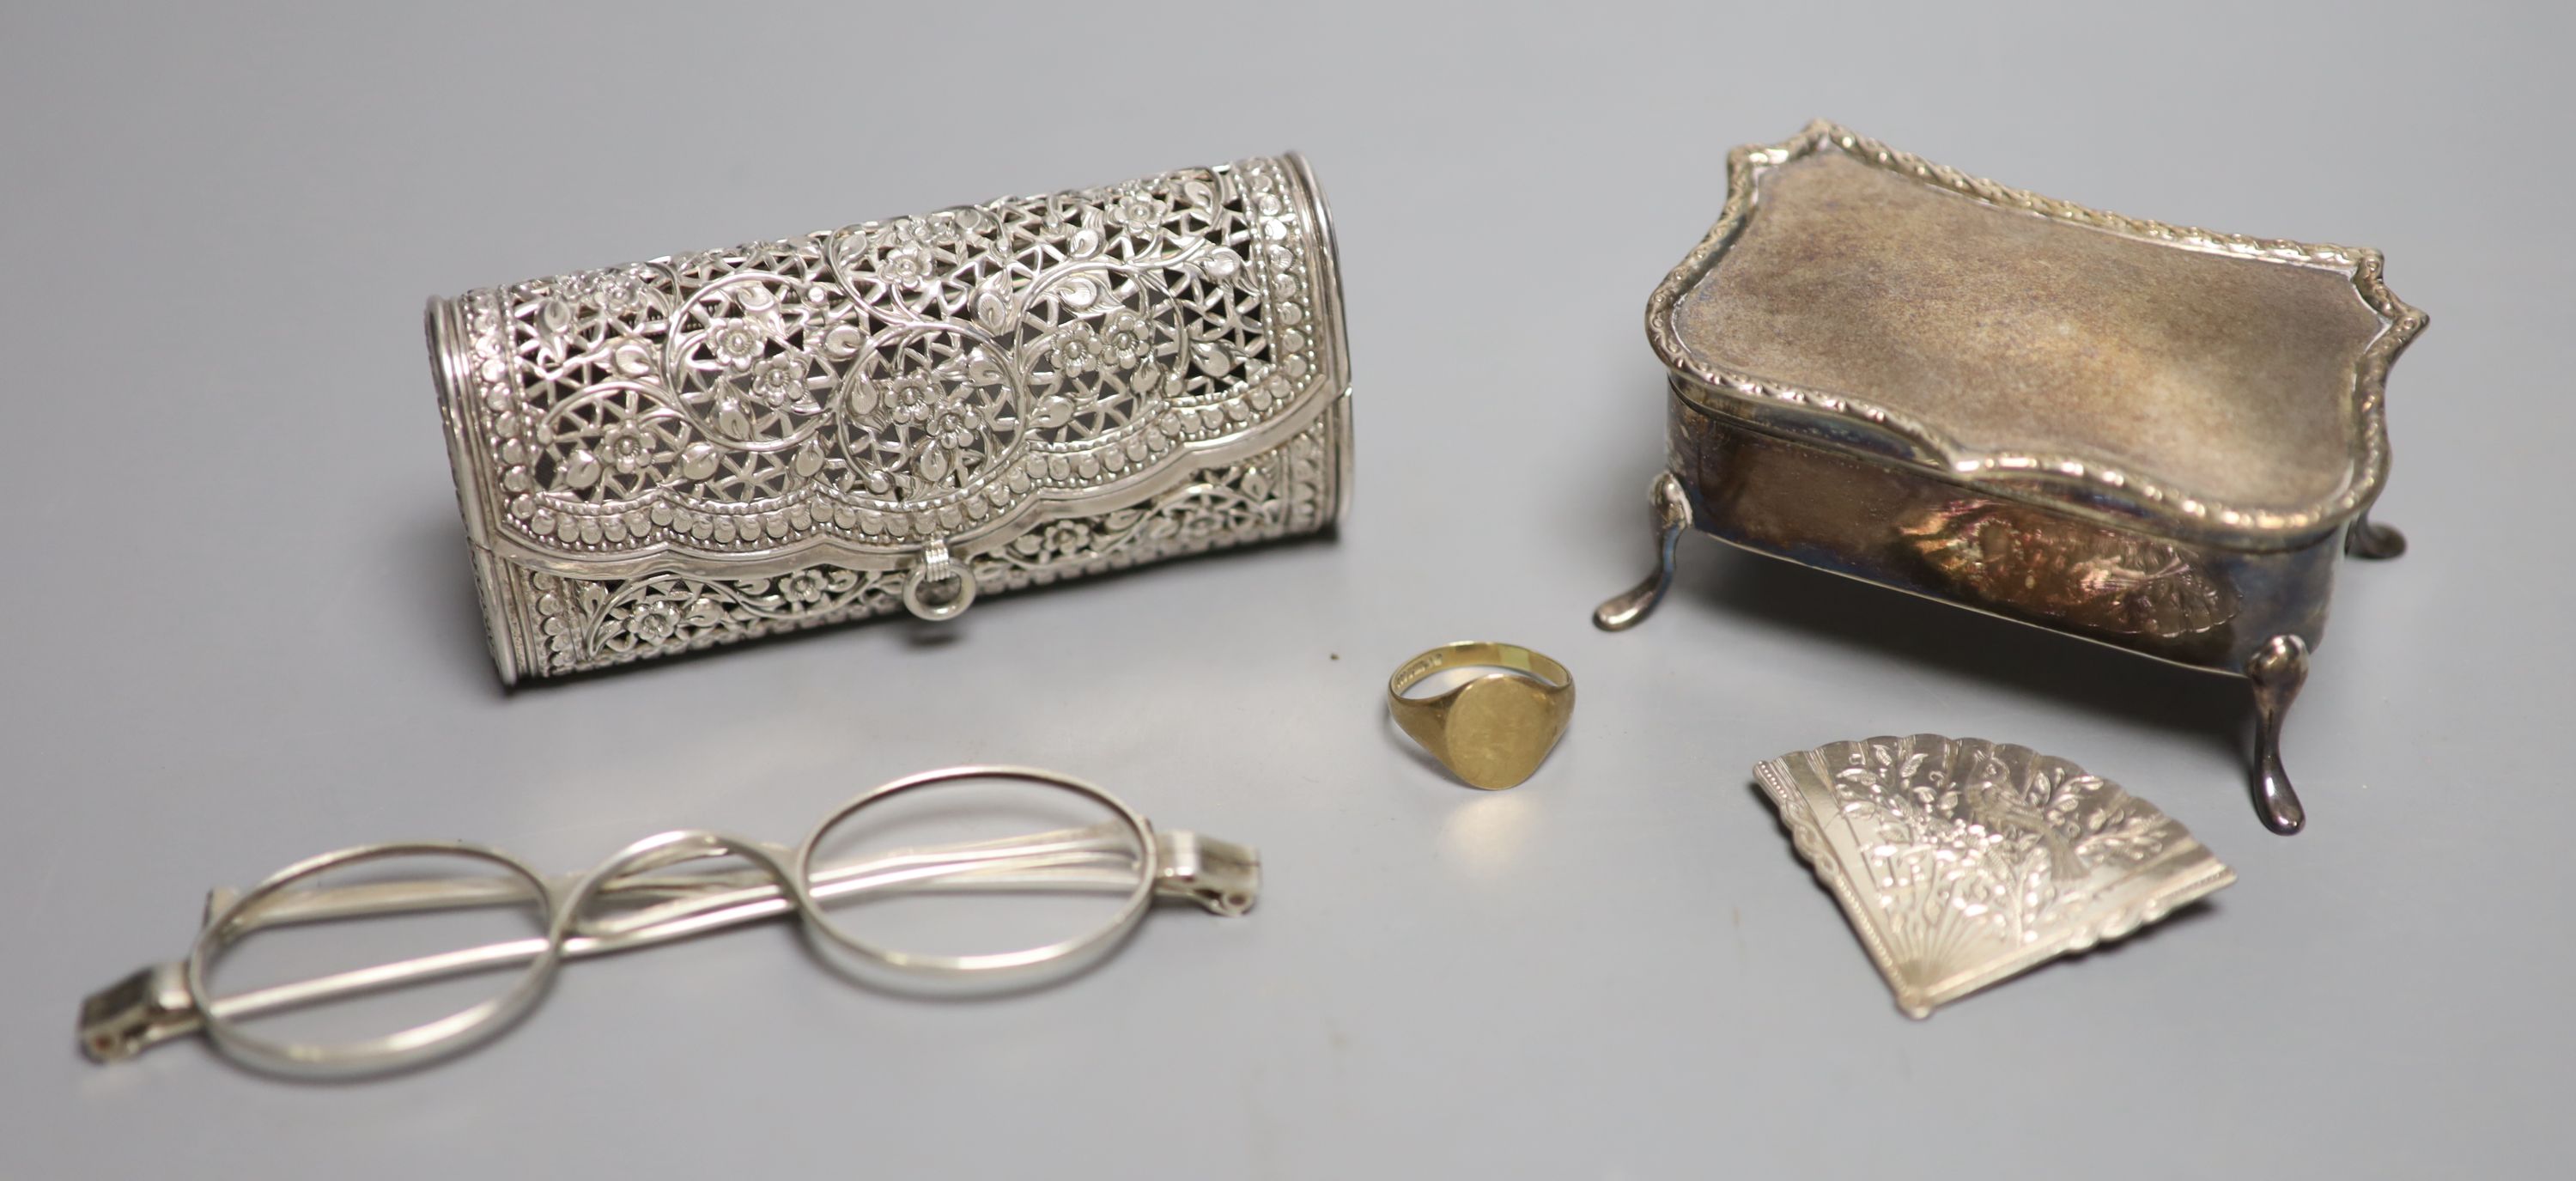 A silver trinket box with velvet-lined interior, an Anglo-Indian white metal coin purse and sundry